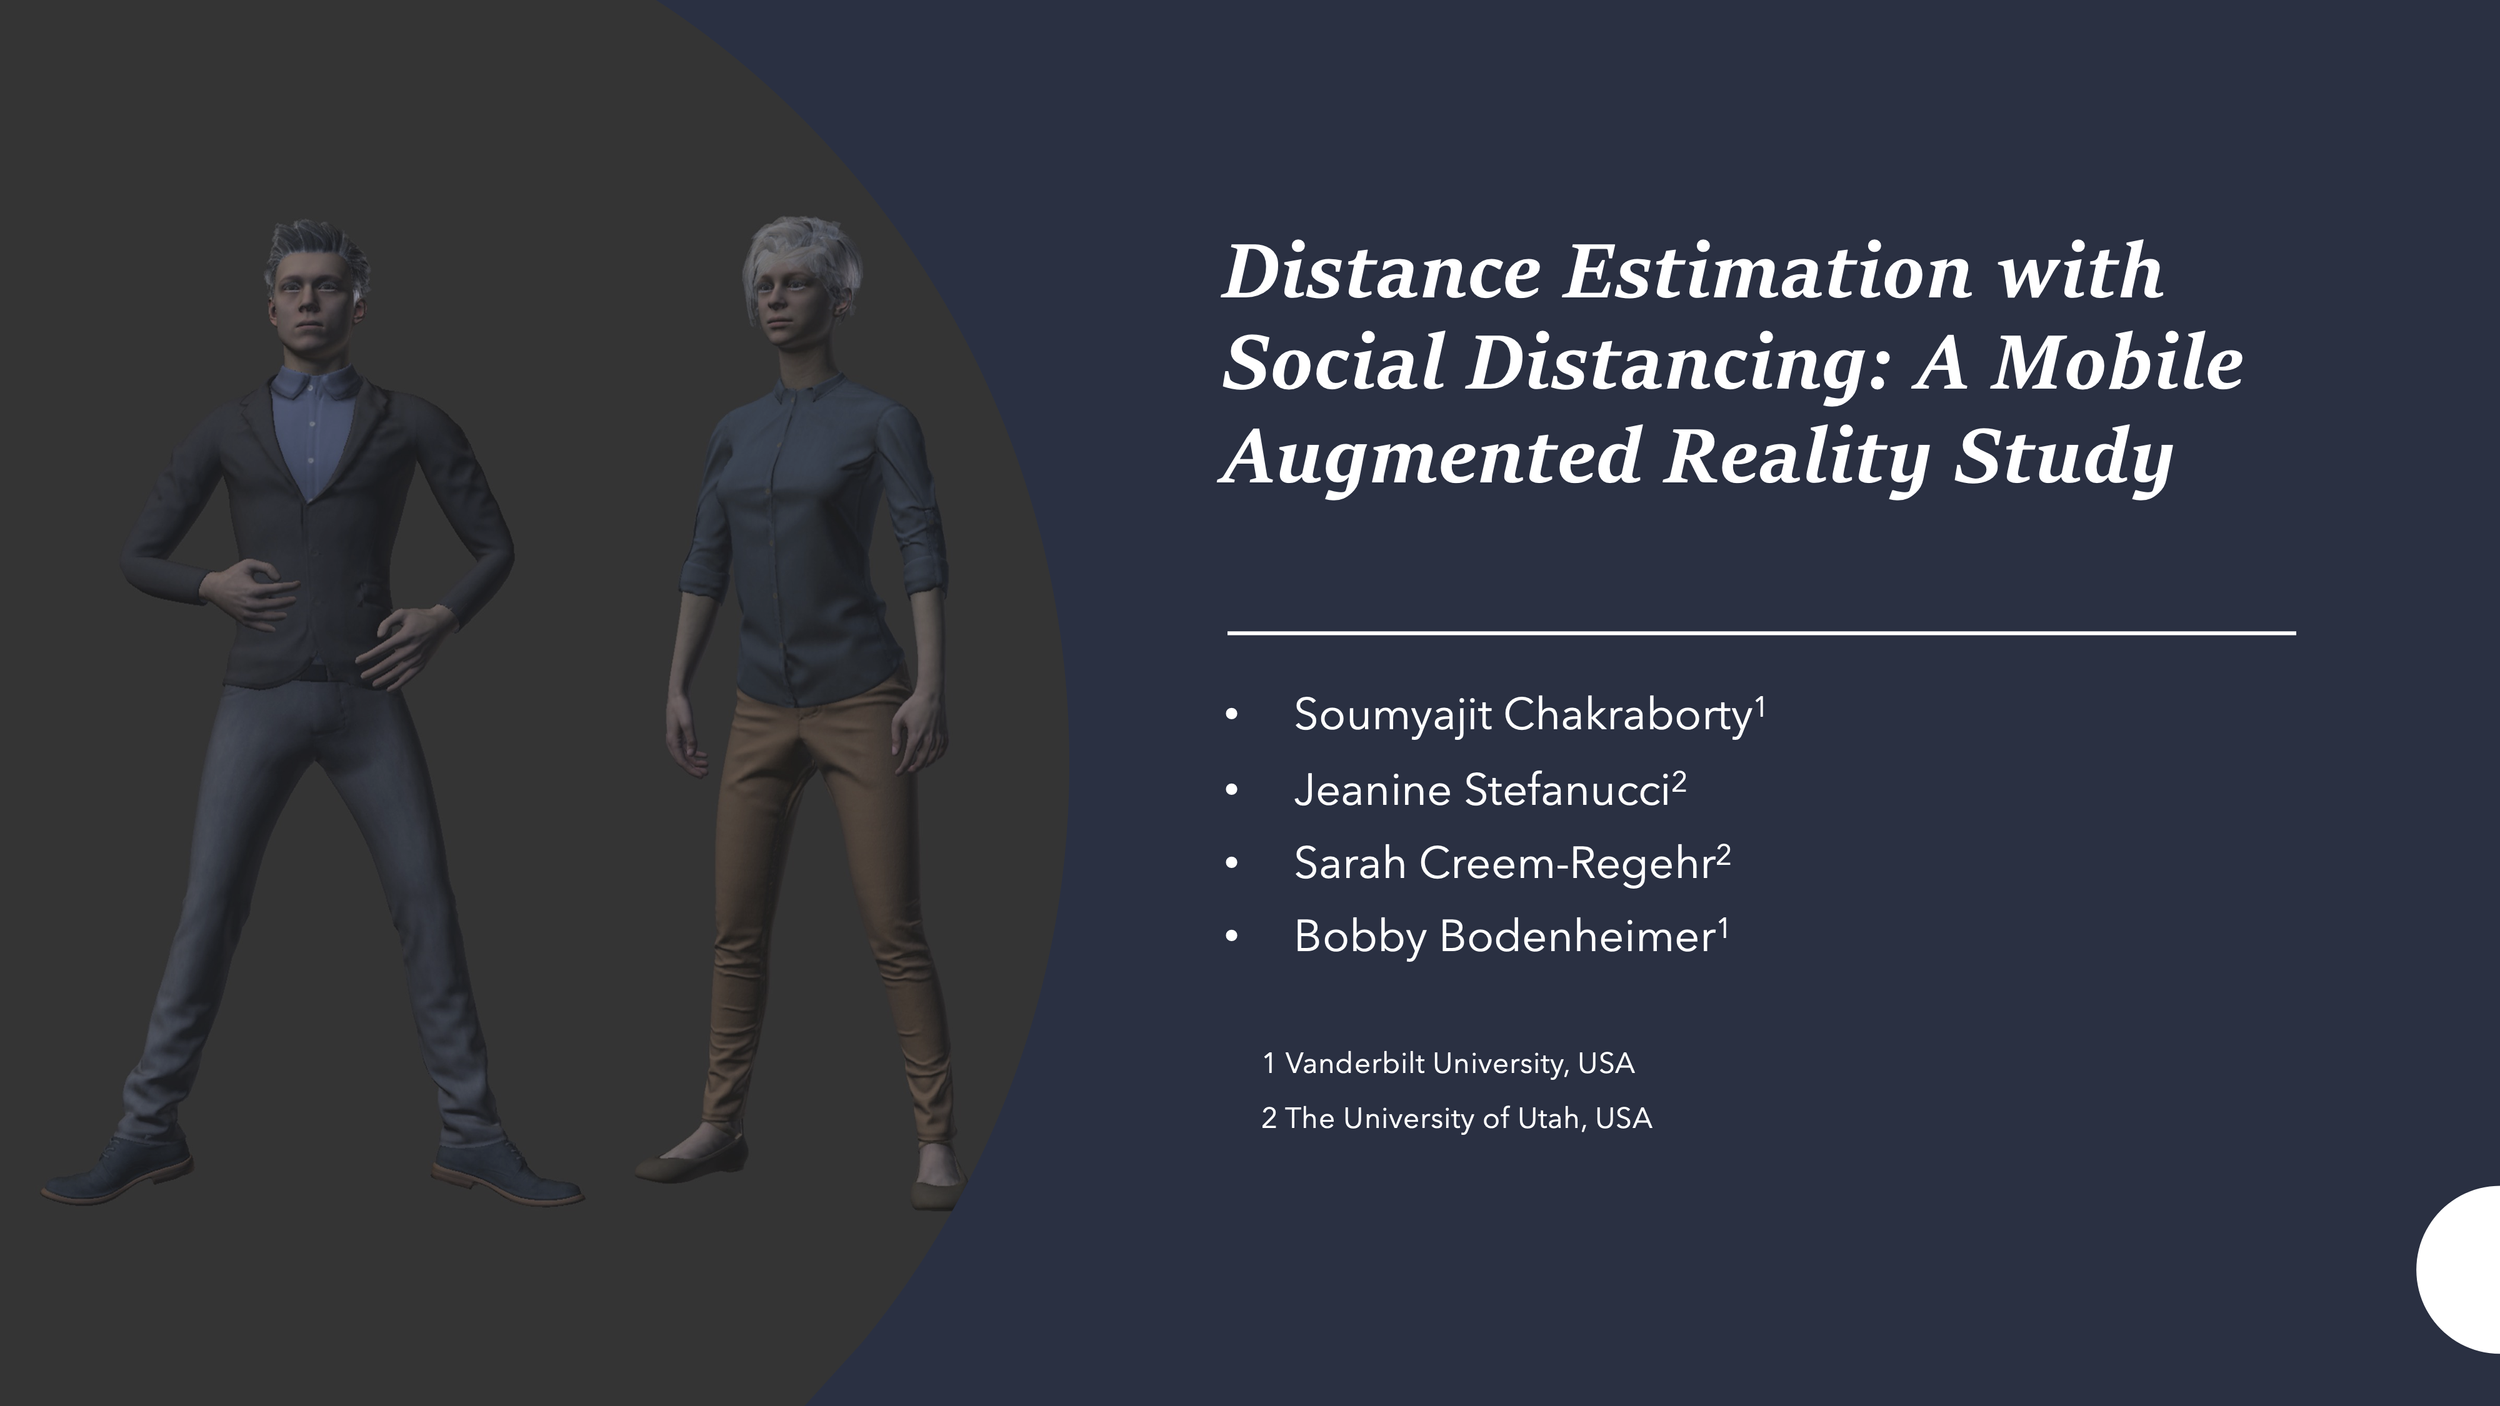 Distance Estimation with Social Distancing: A Mobile Augmented Reality Study